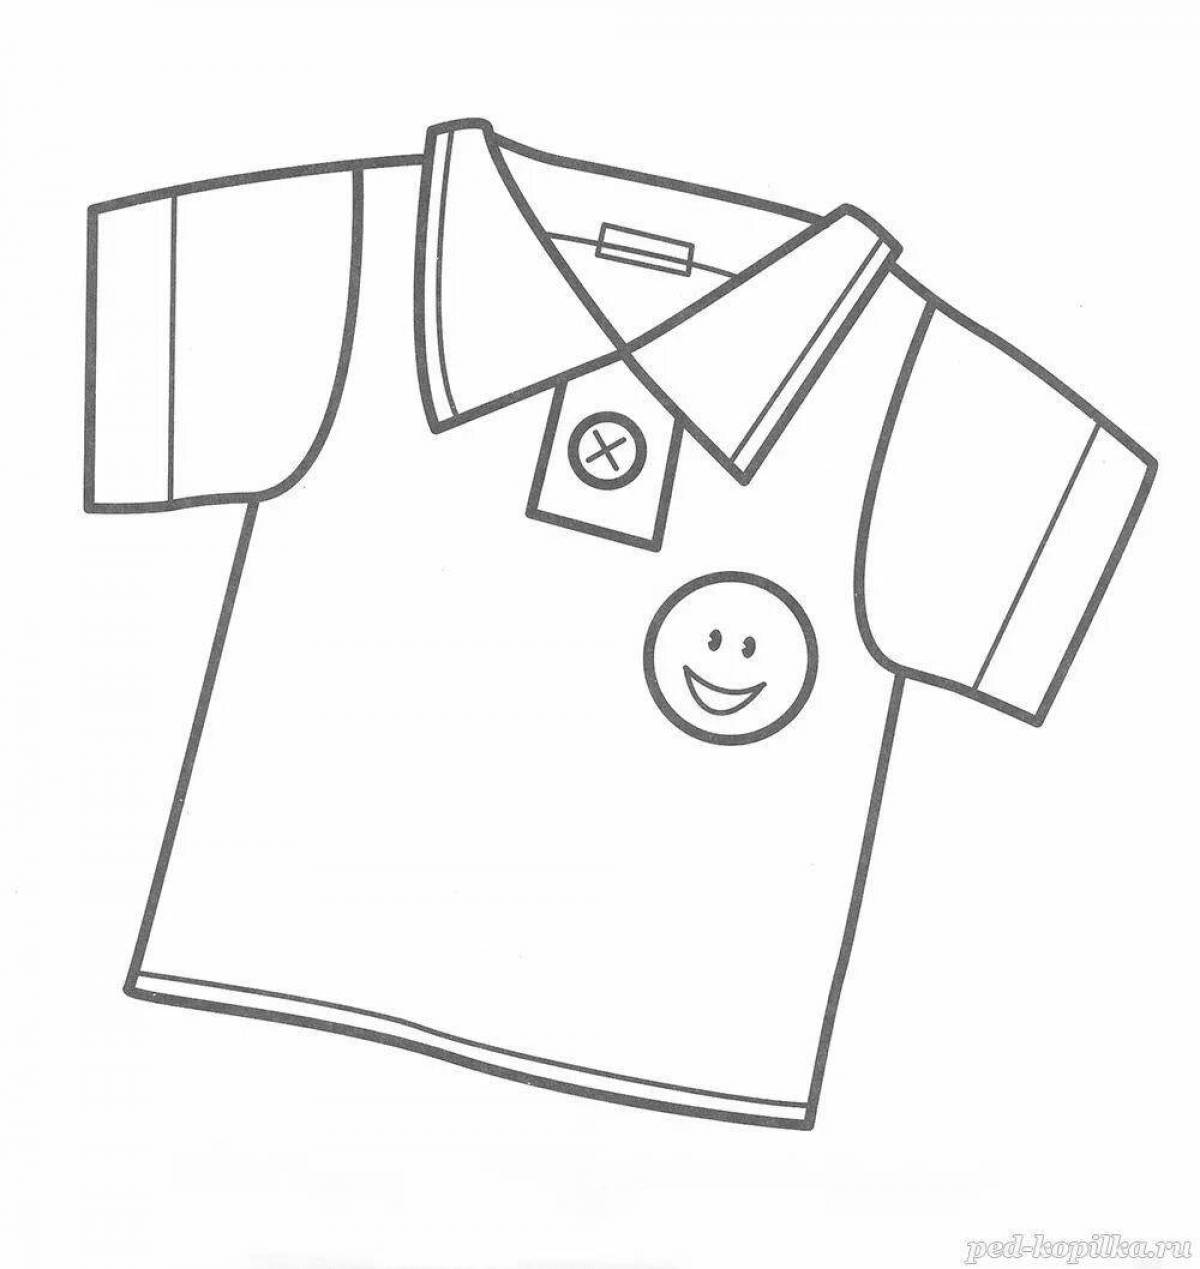 Playful shirt coloring for 4-5 year olds